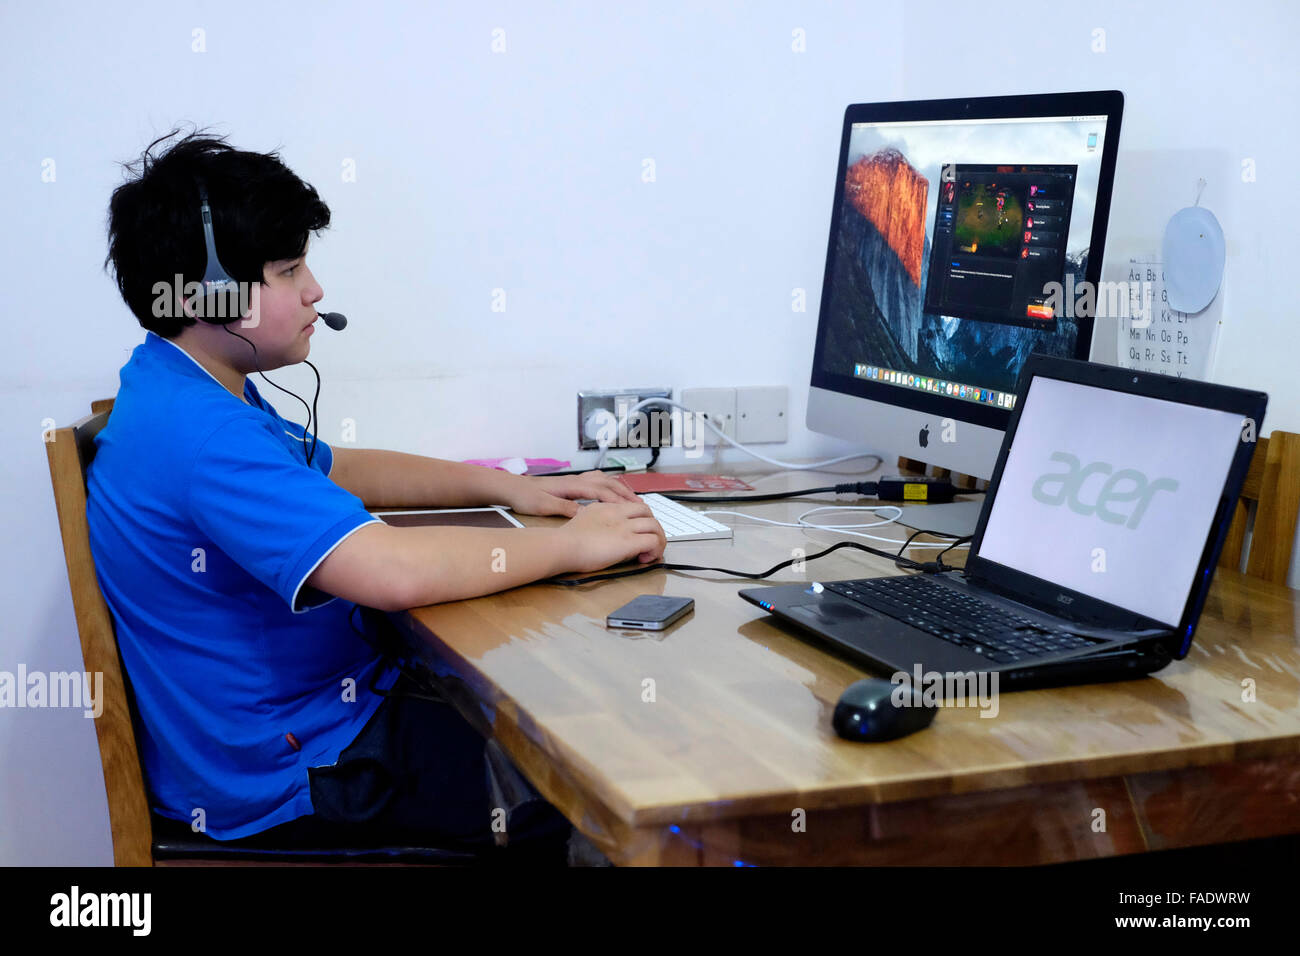 young boy sat playing games on computer surrounded by electronic gadgets england uk Stock Photo